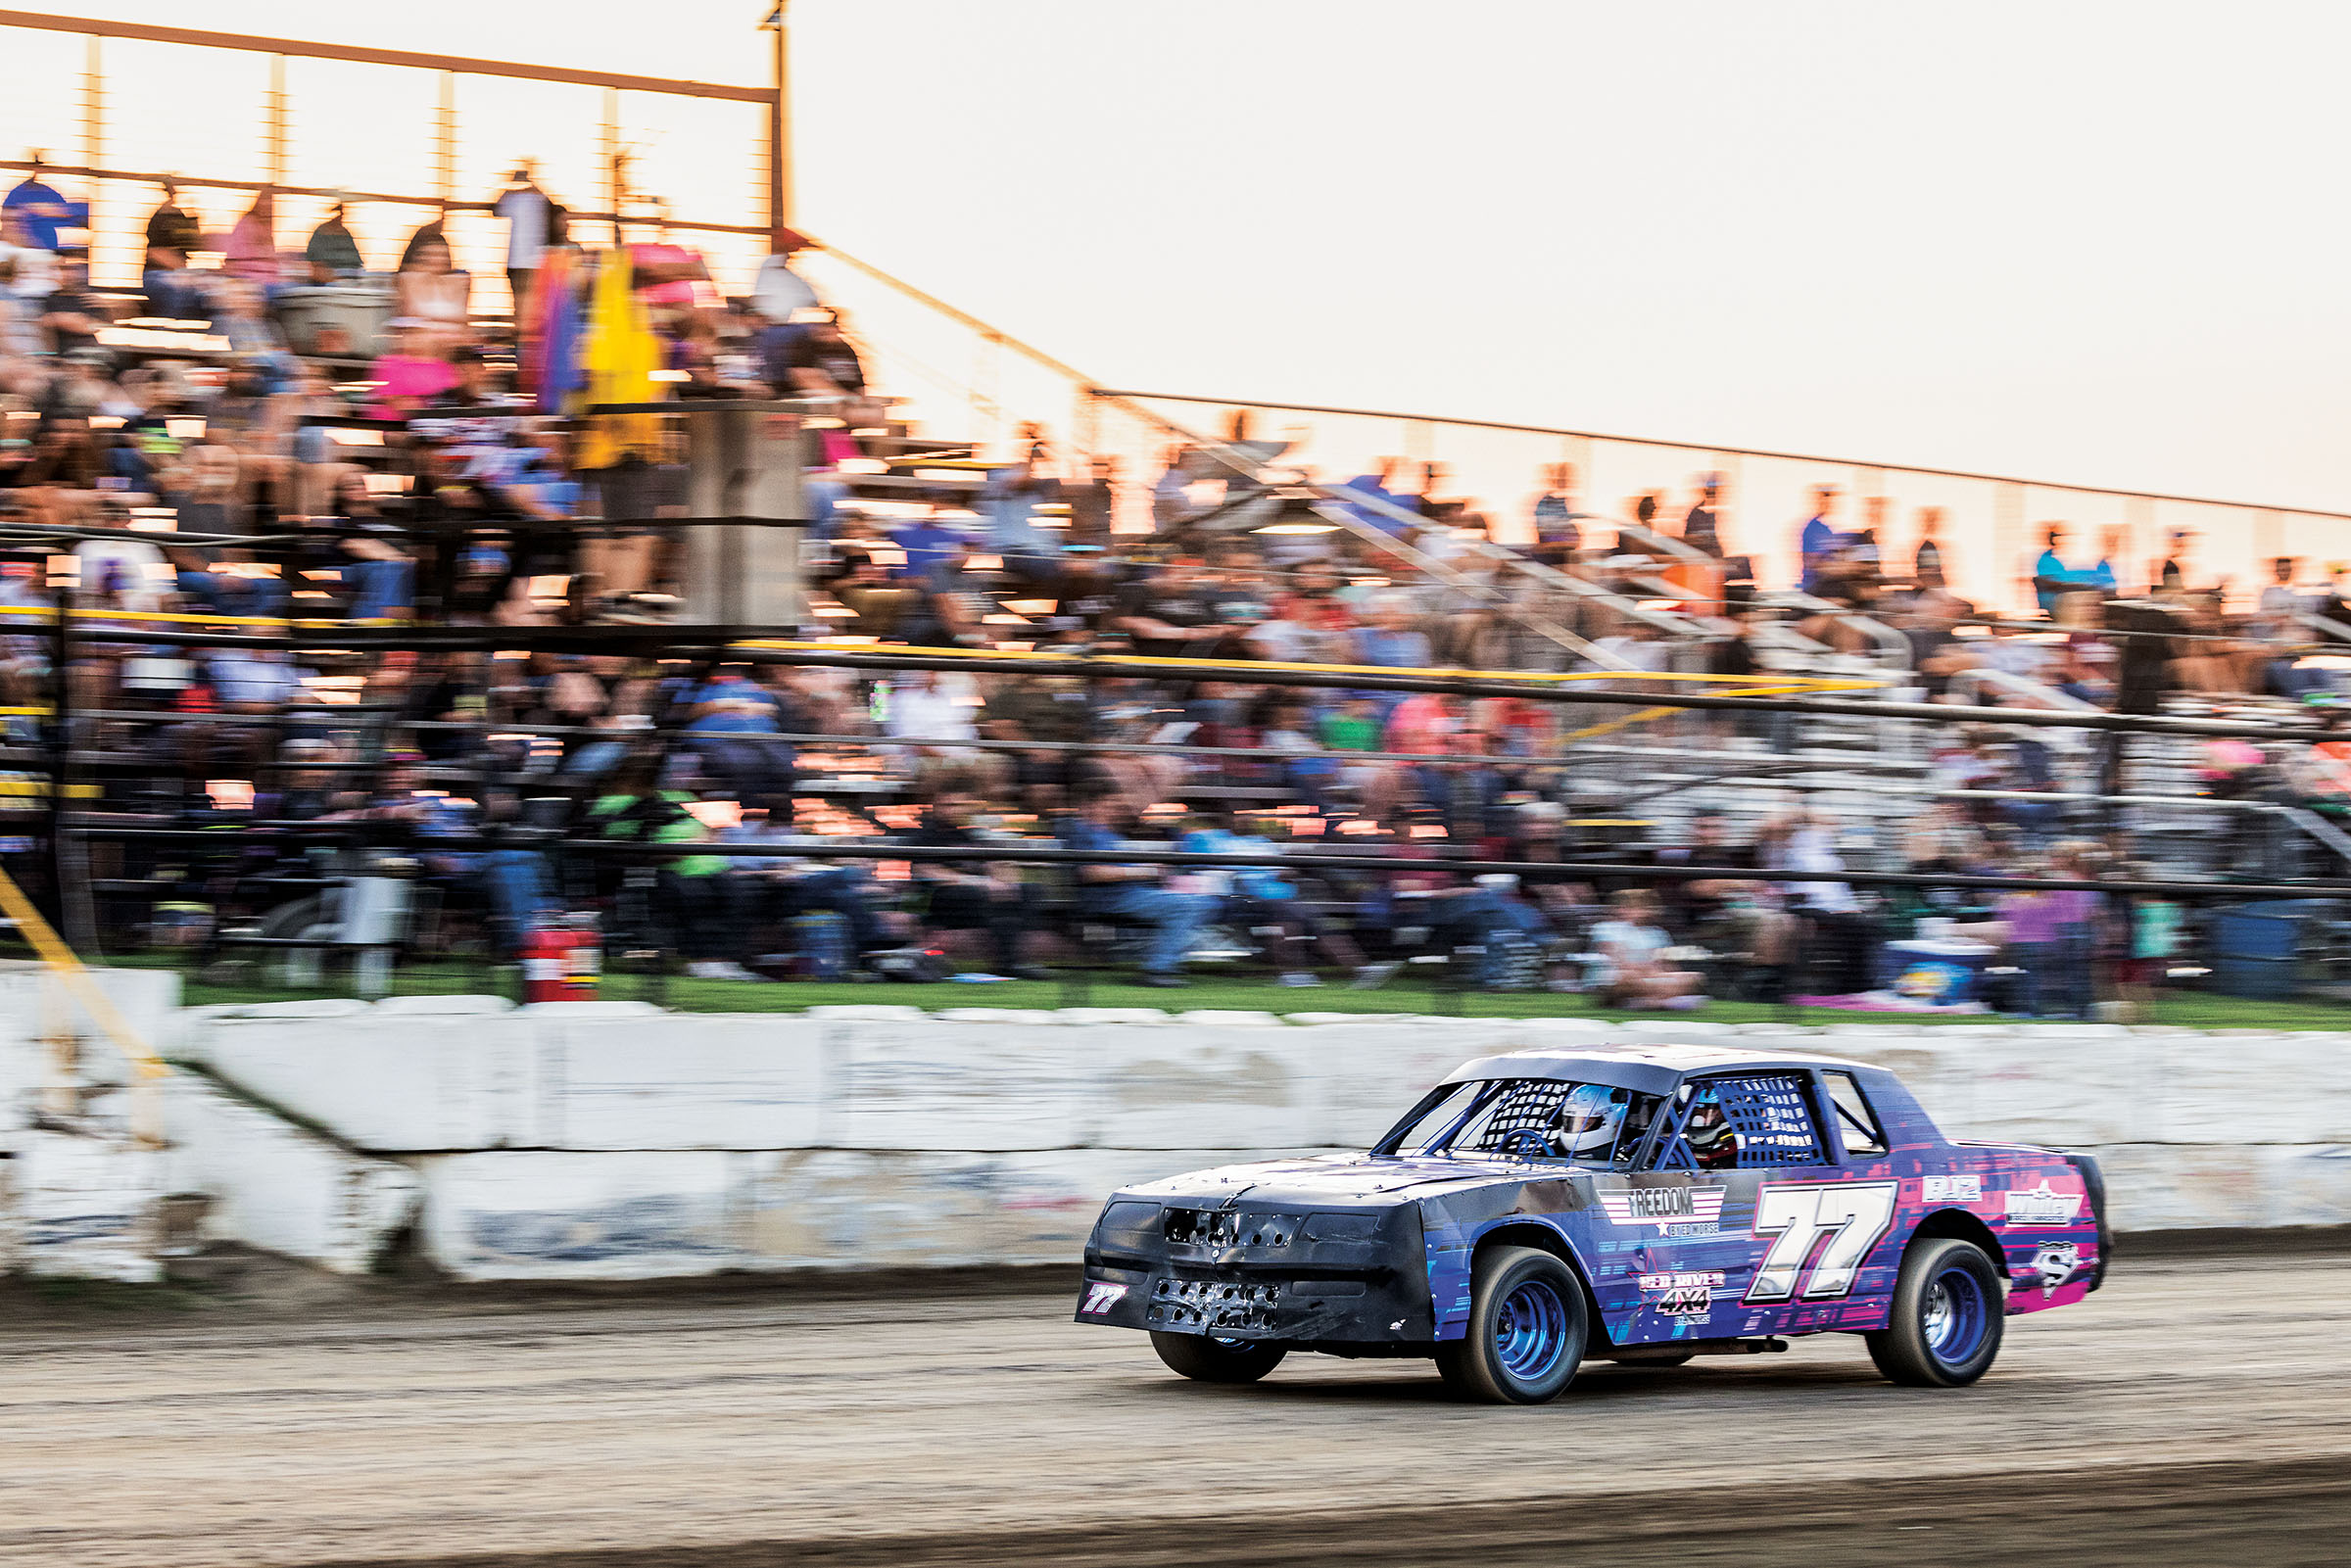 A purple stock car races down a racetrack in front of a crowd of spectators